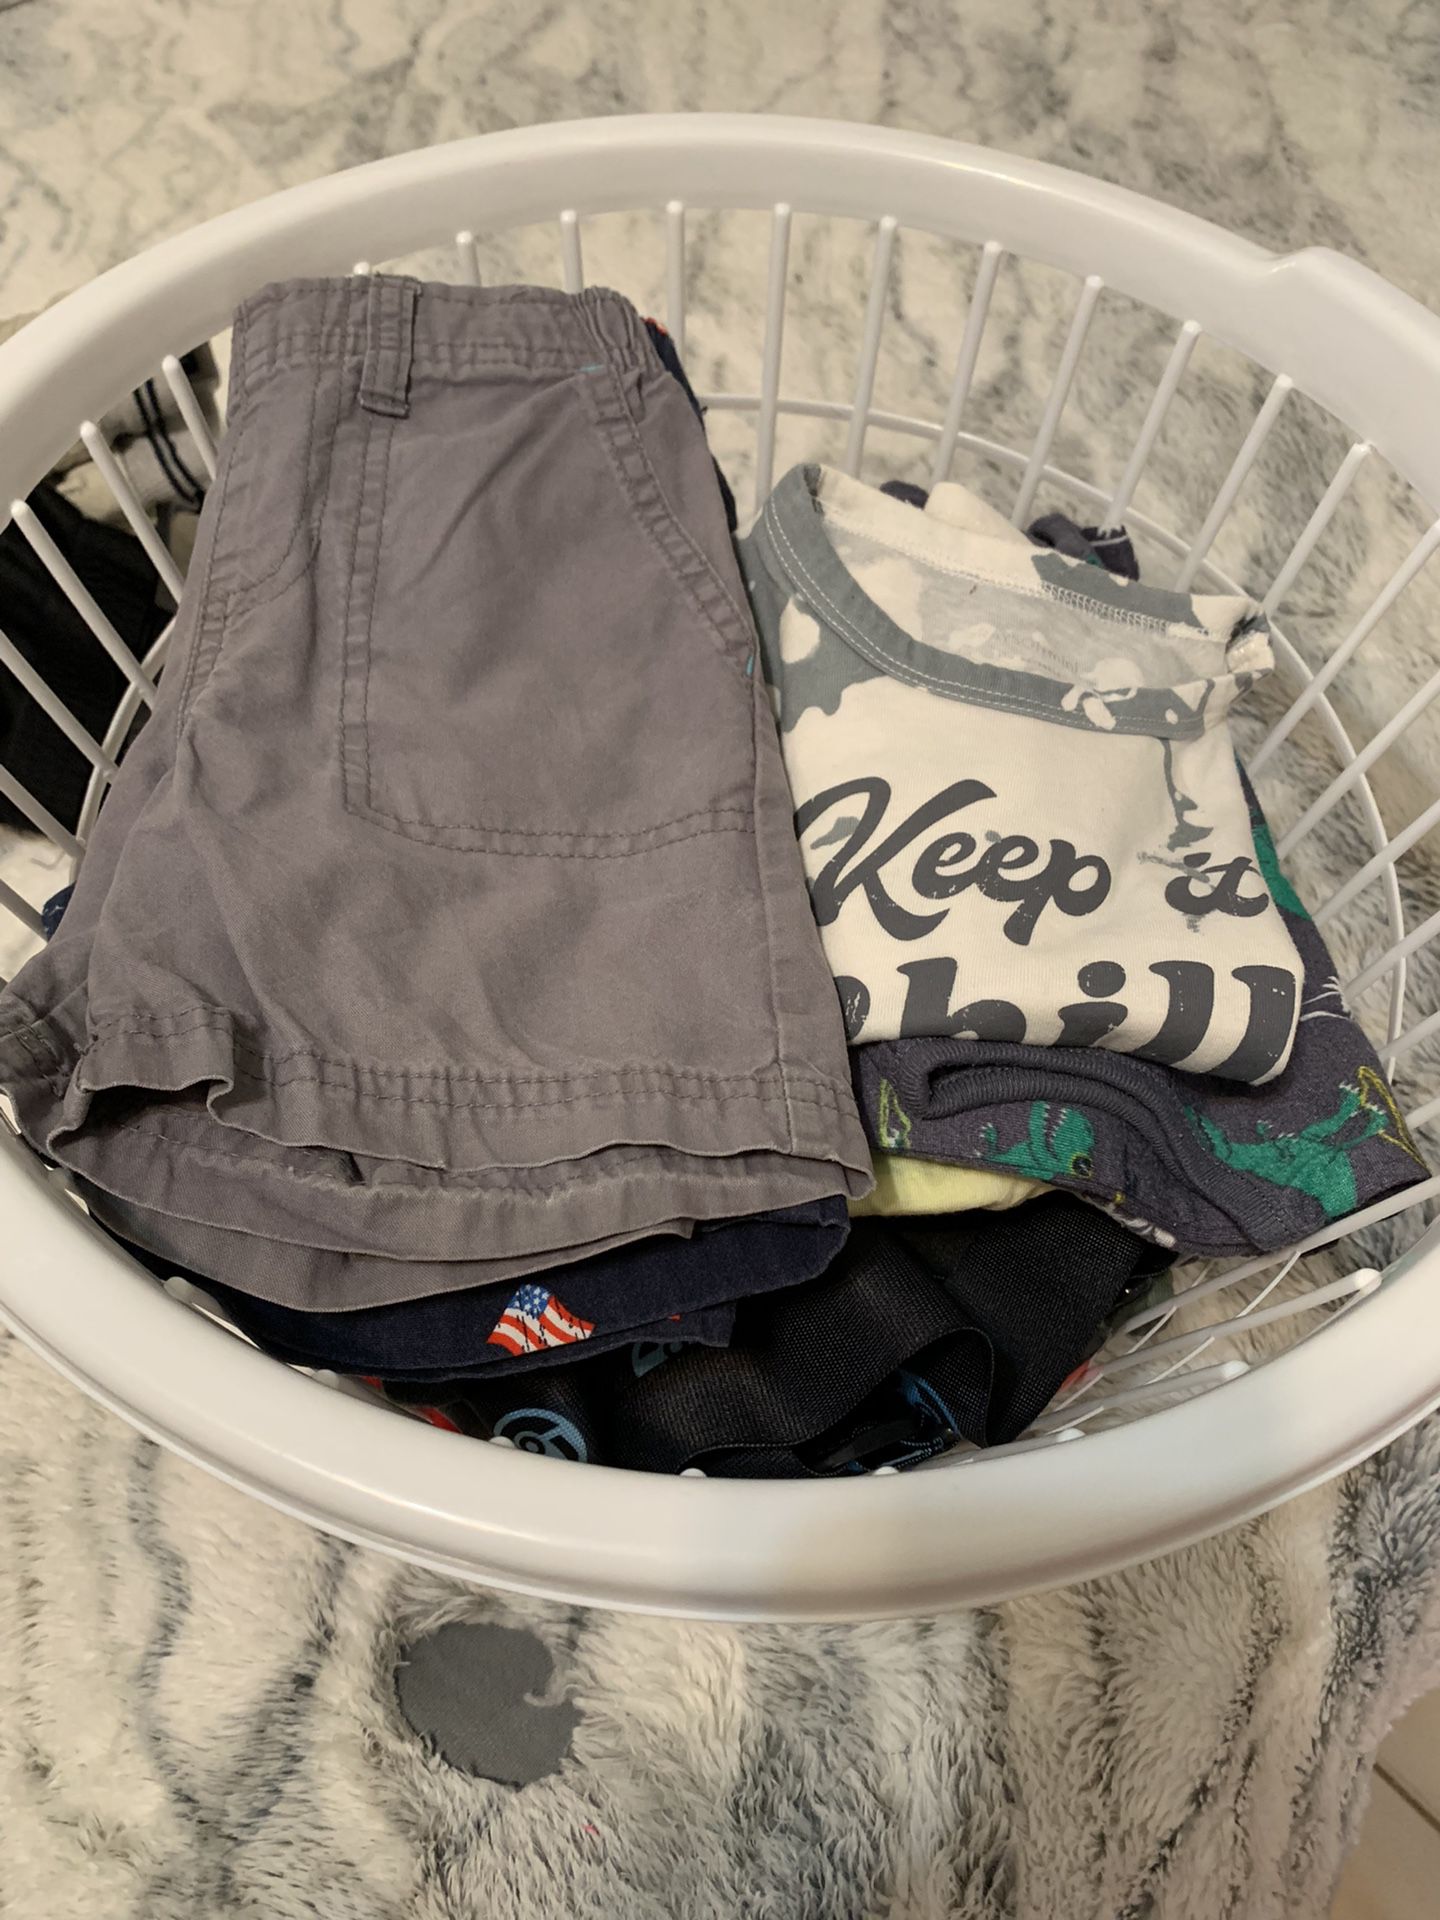 2T-5T Toddler Clothes Basket $10 All 